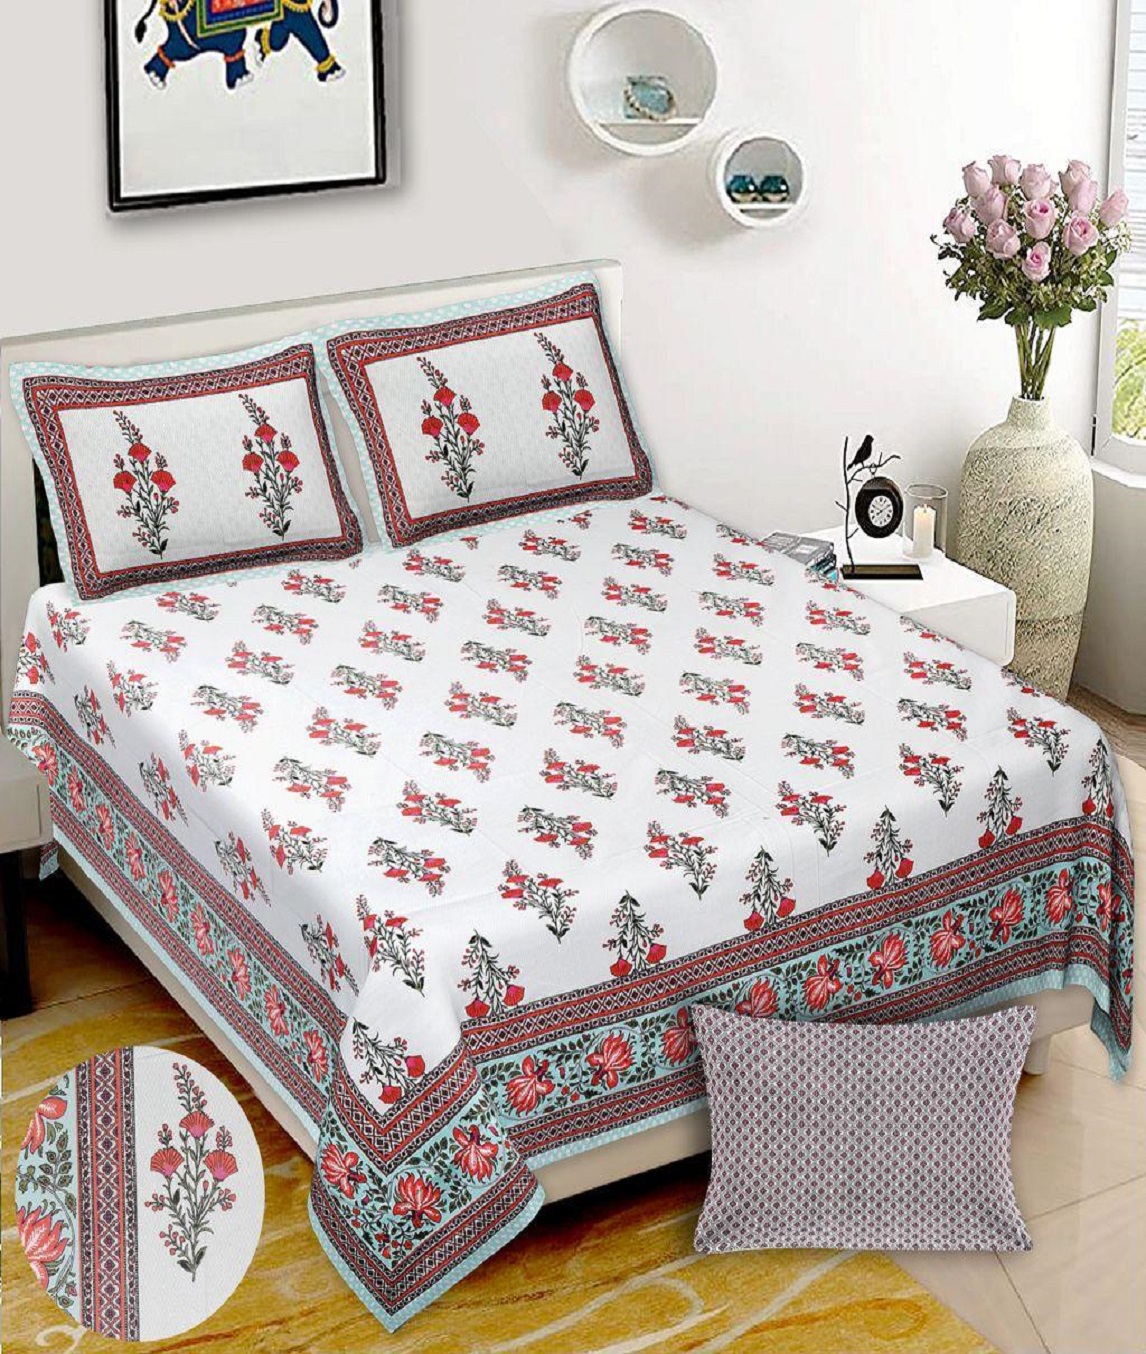 Jumbo size bedsheets with 2 pillow covers